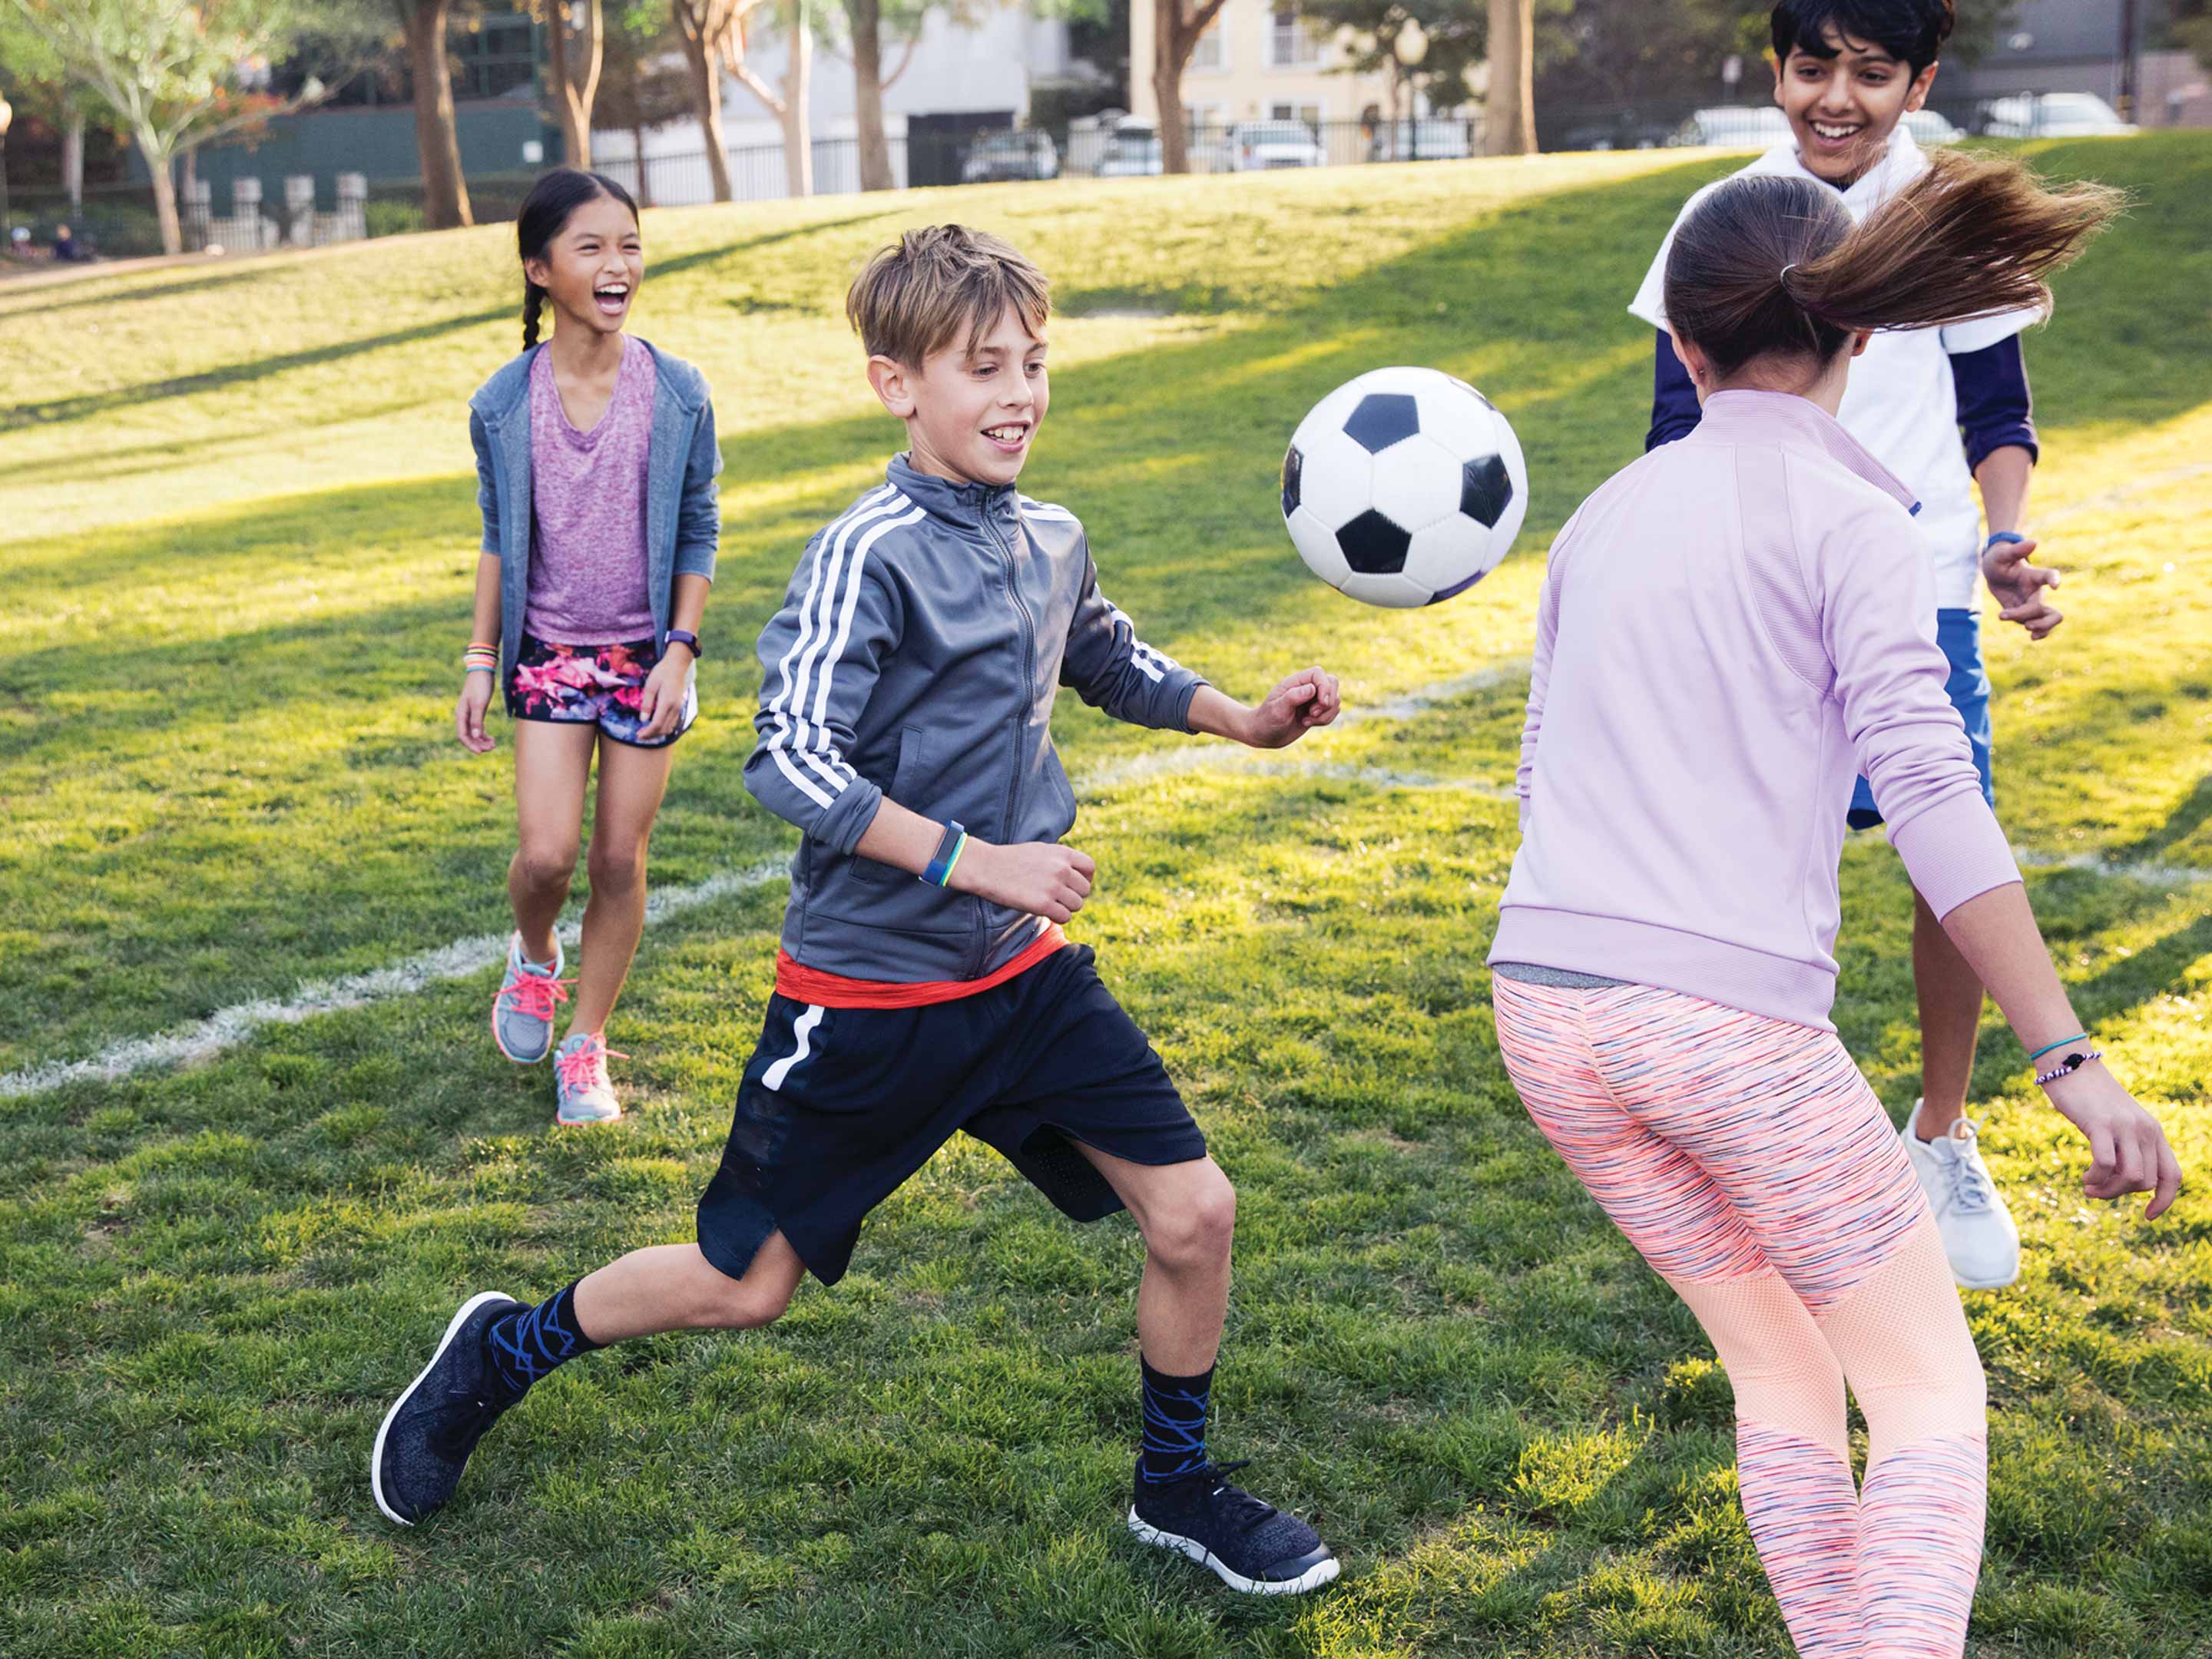 If Fitbit has its way, every kid in the future will have an Ace fitness track :O